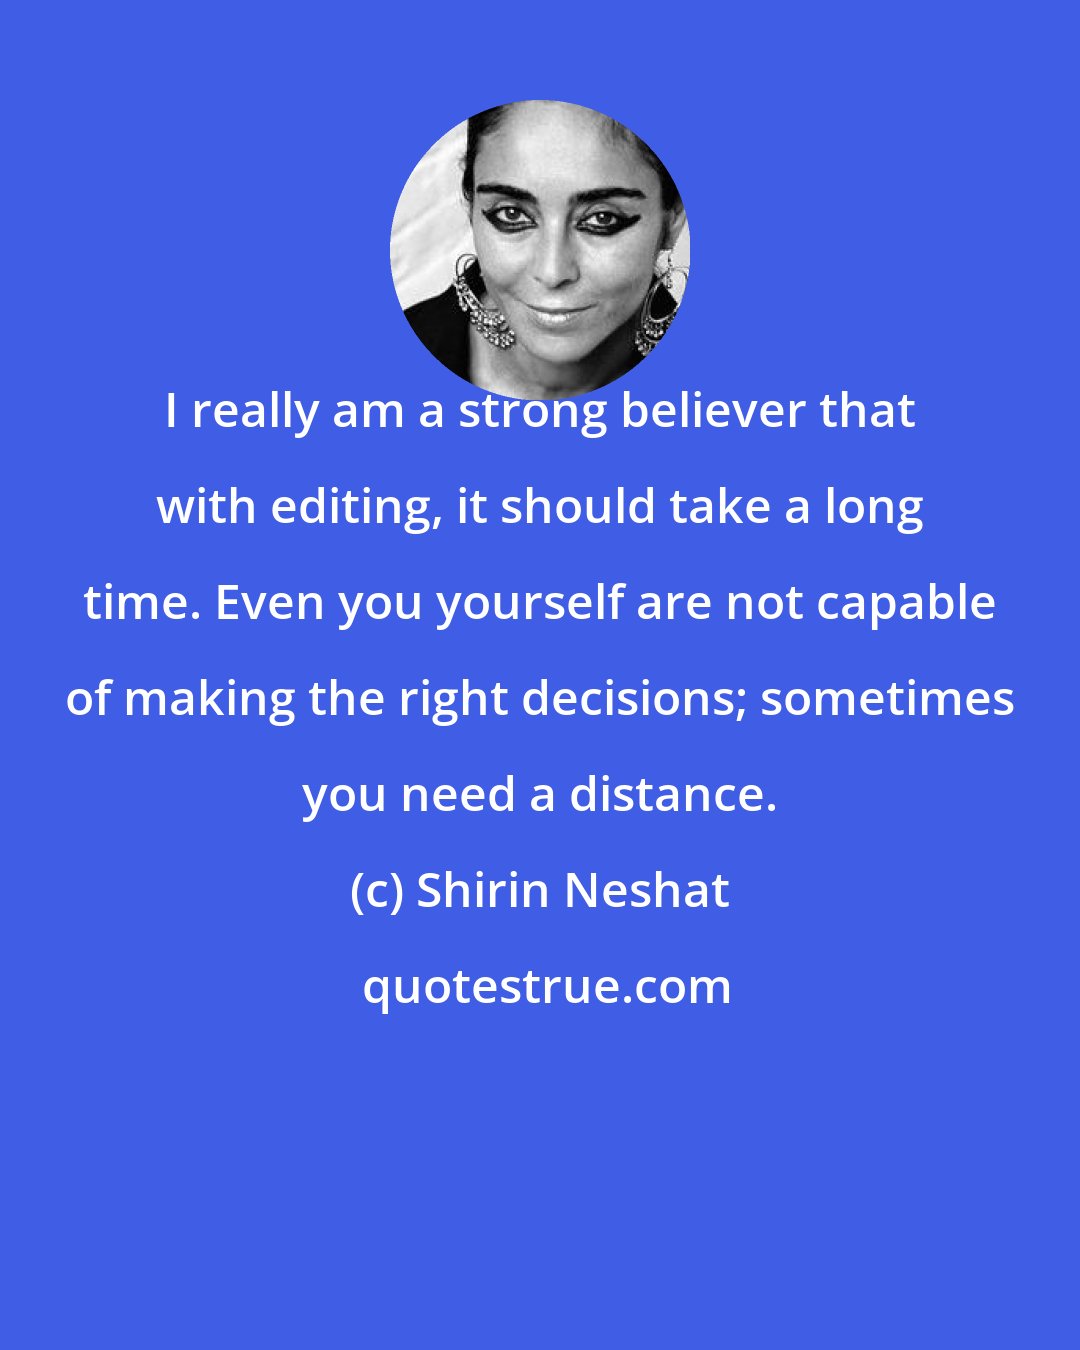 Shirin Neshat: I really am a strong believer that with editing, it should take a long time. Even you yourself are not capable of making the right decisions; sometimes you need a distance.